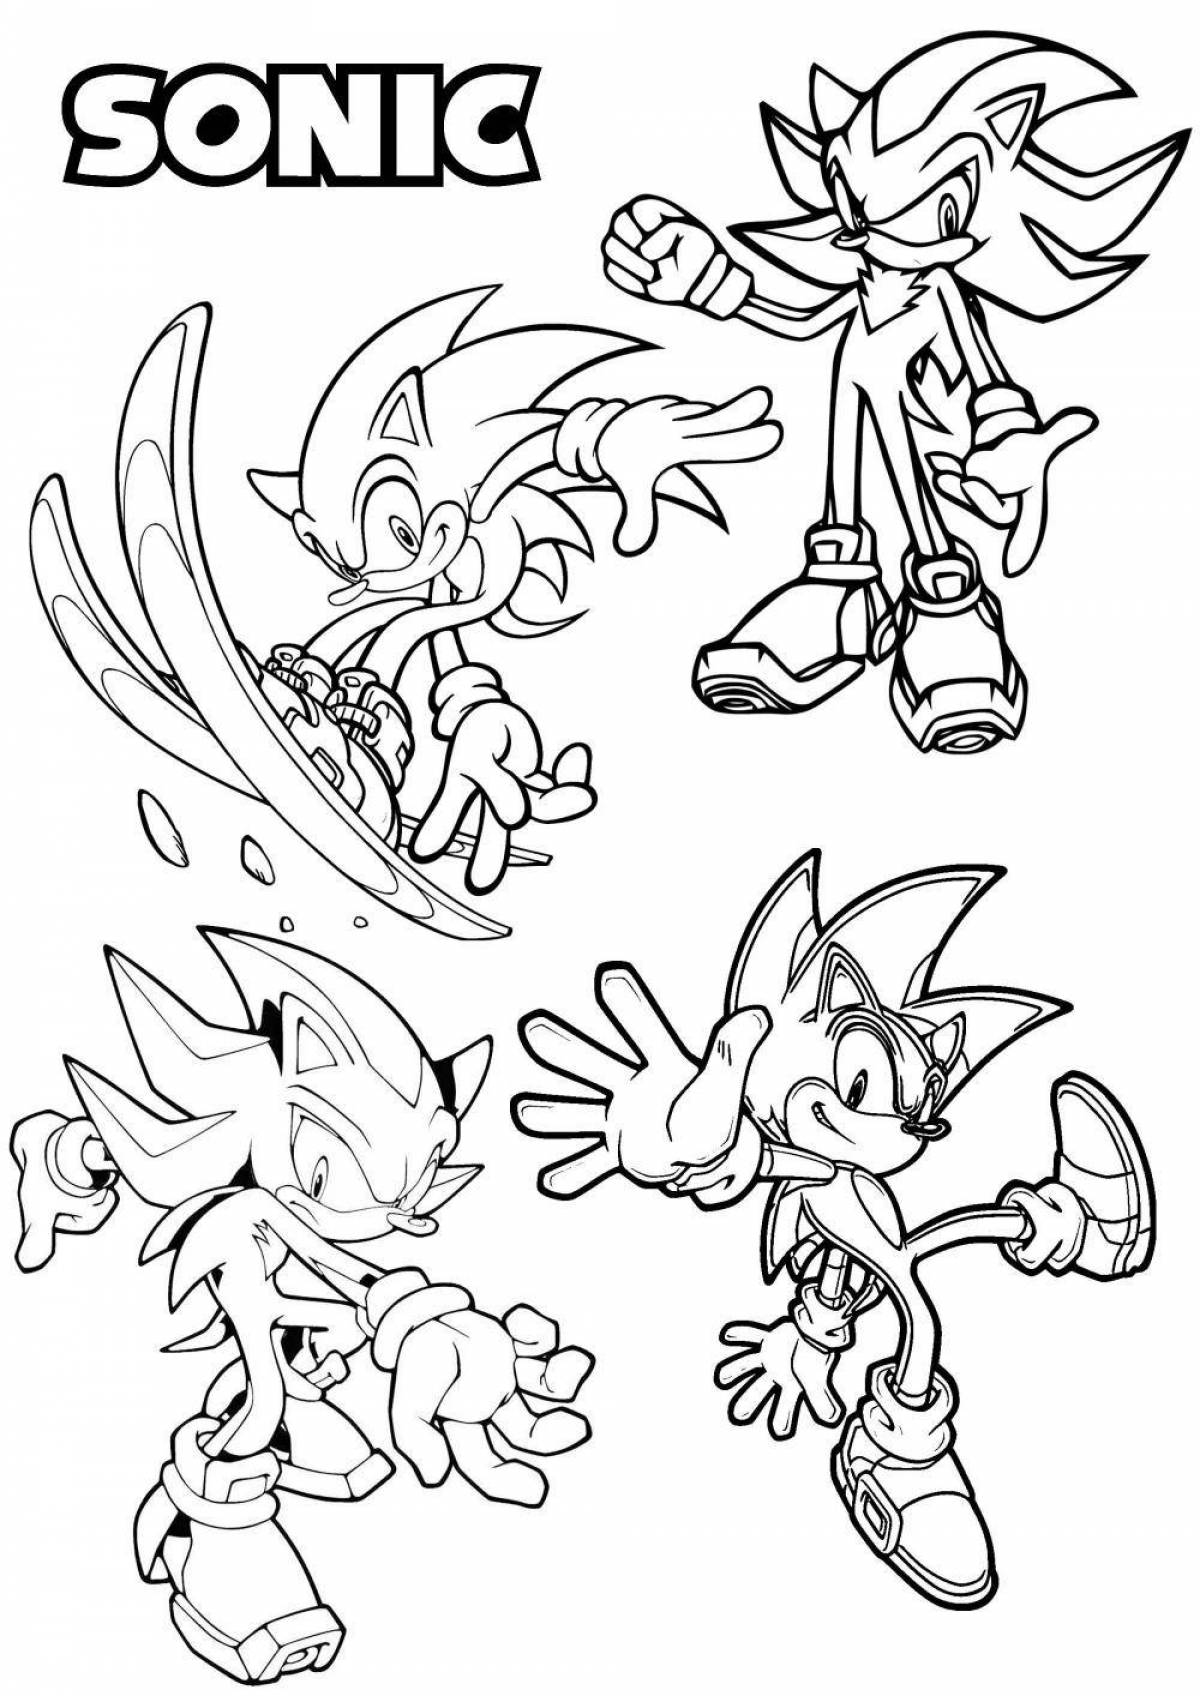 Sonic theos awesome coloring book